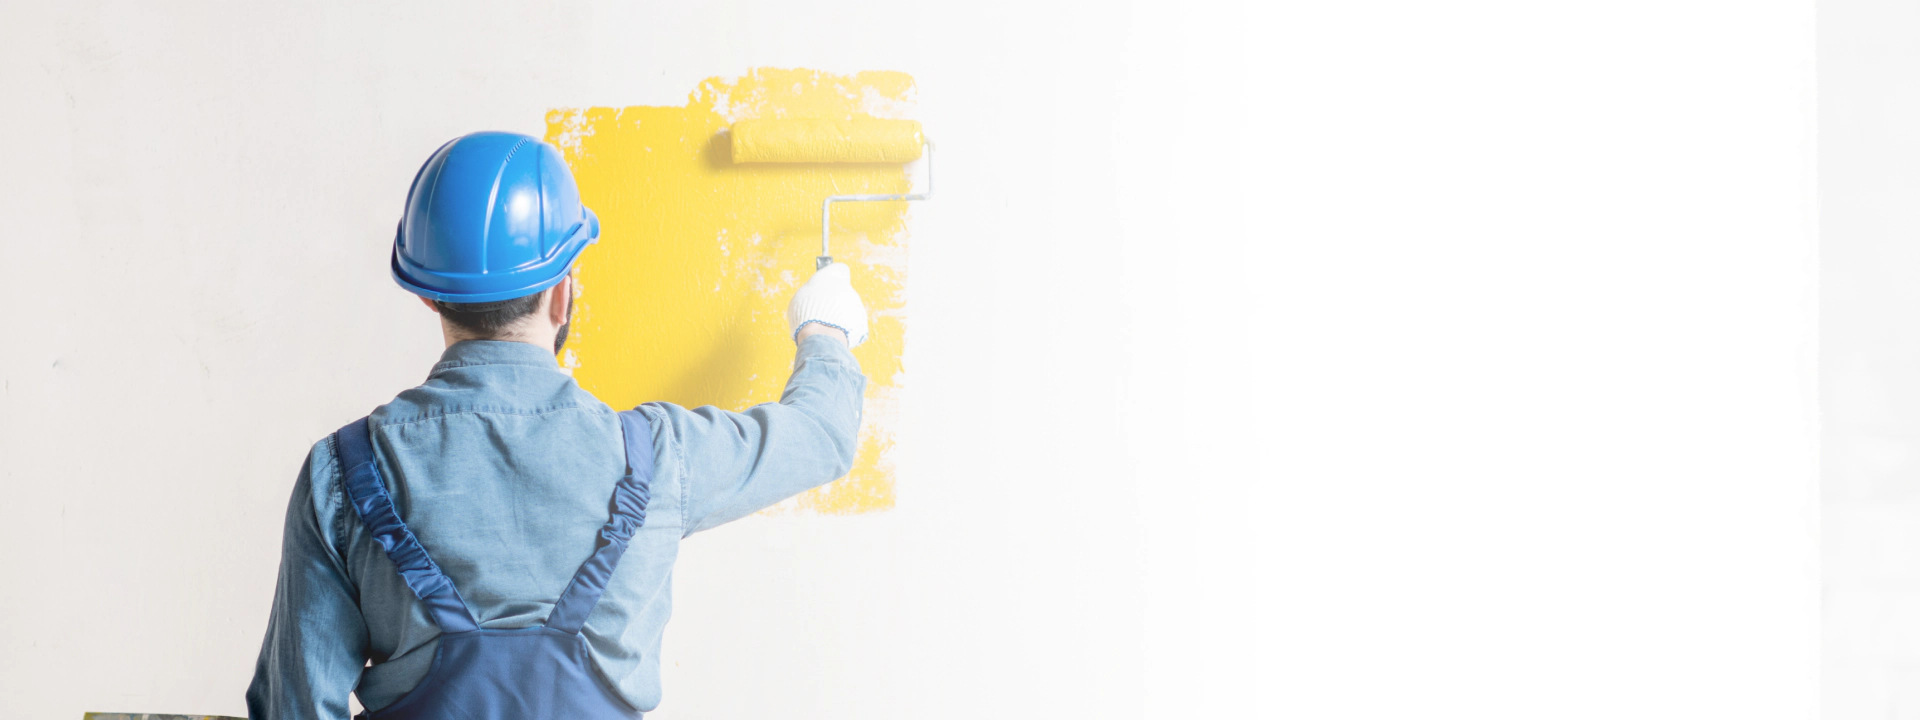 wall=painting with yellow paint